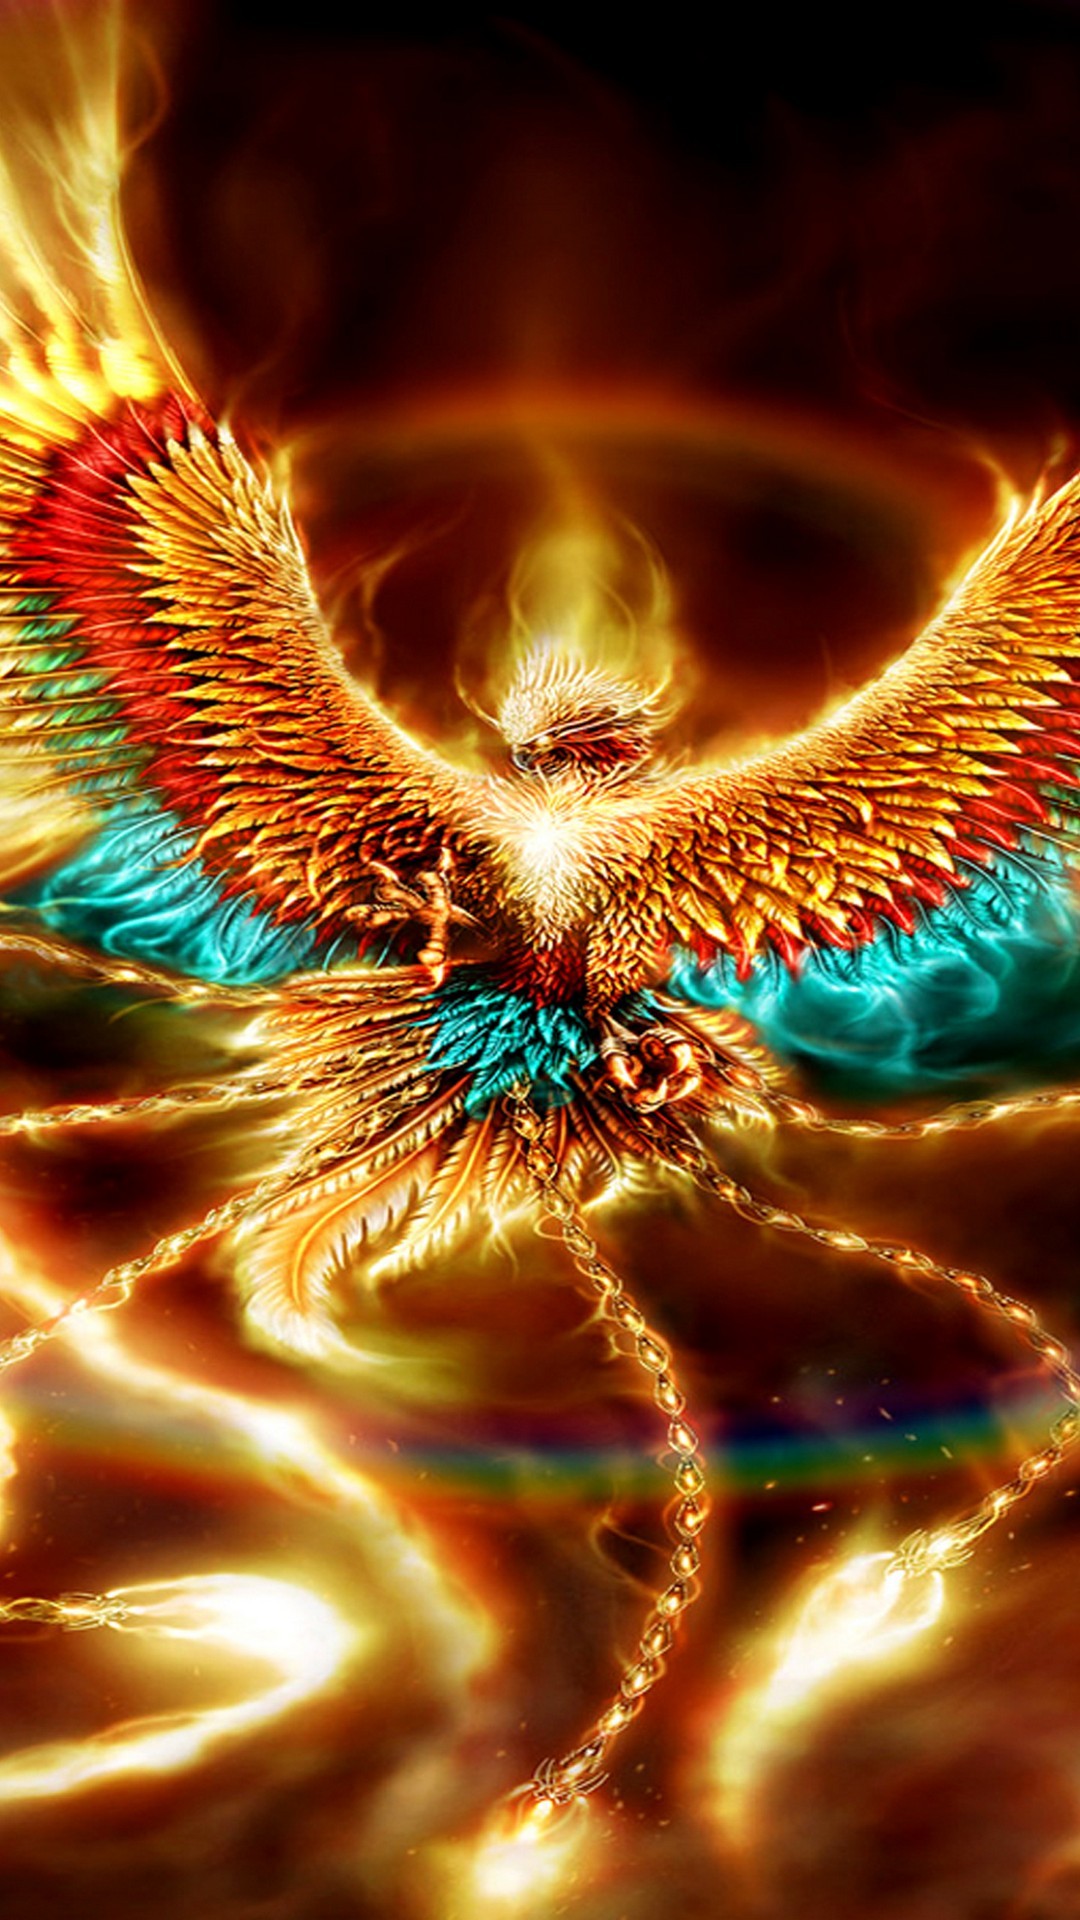 Phoenix Wallpaper For iPhone with resolution 1080X1920 pixel. You can make this wallpaper for your iPhone 5, 6, 7, 8, X backgrounds, Mobile Screensaver, or iPad Lock Screen